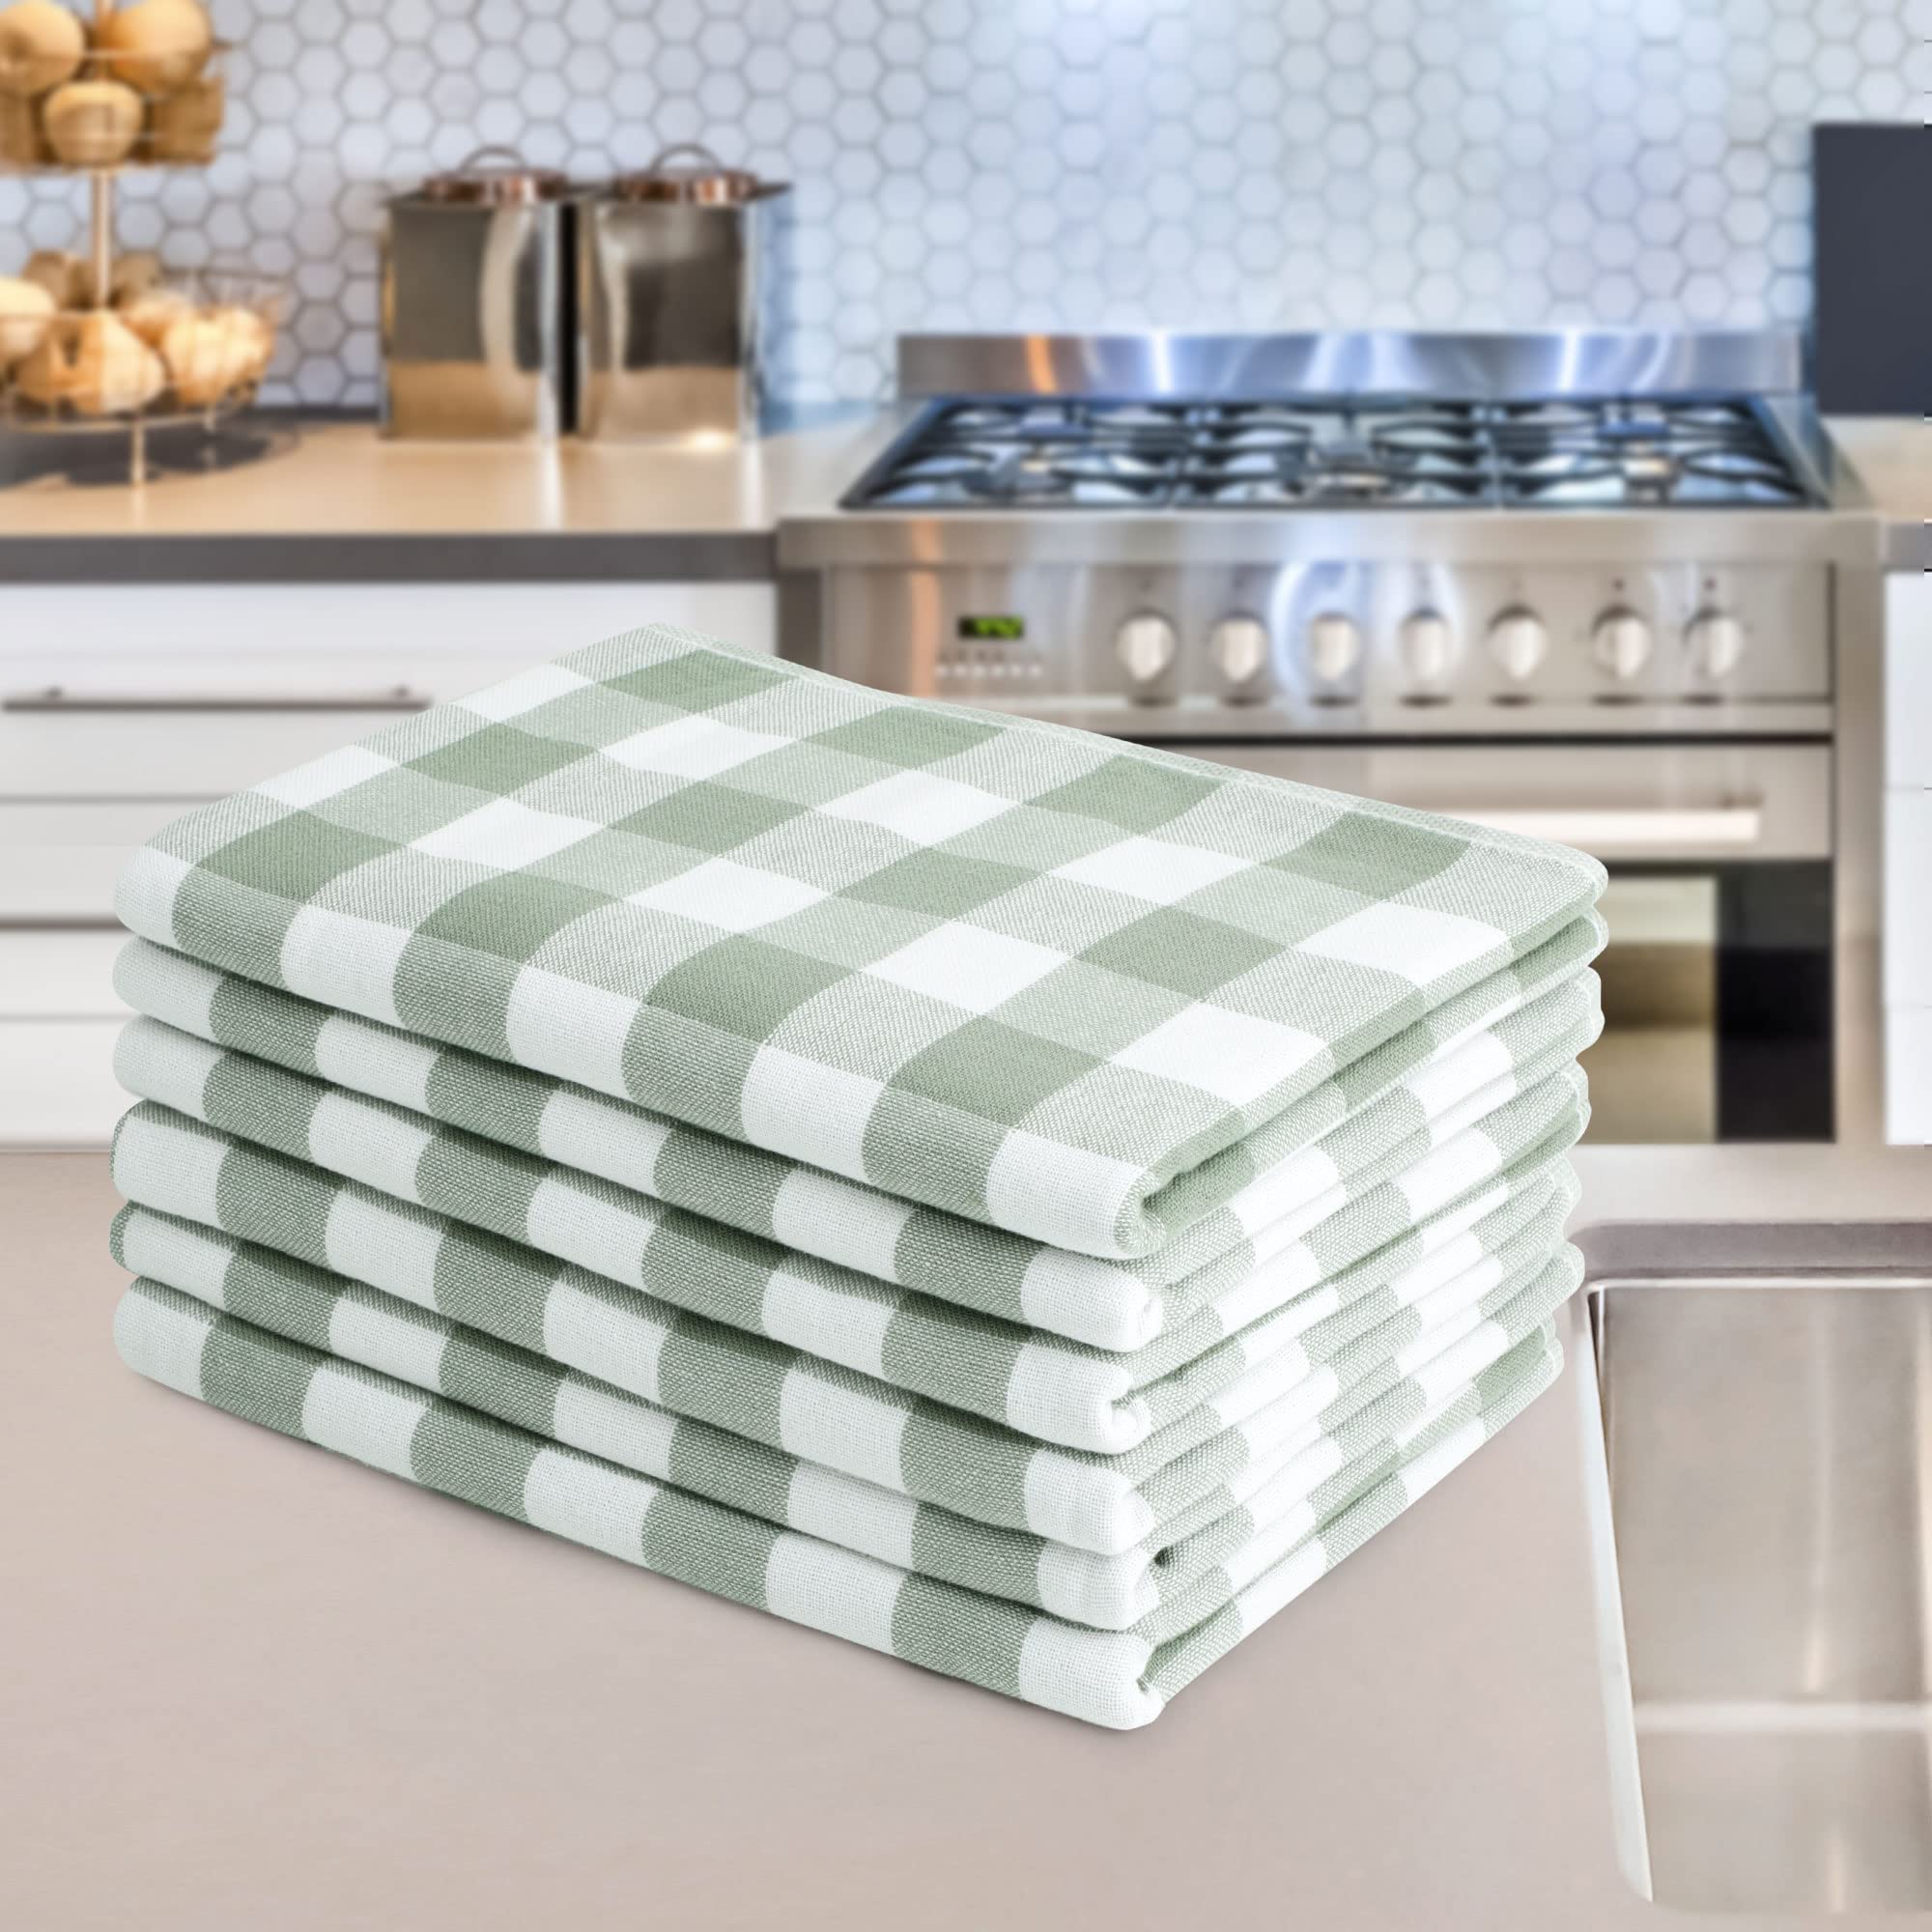 PiccoCasa 100% Cotton Terry Kitchen Towels Set of 6 Plaid Pattern (13 x 29 Inch) Soft Absorbent Drying Dish Towels for Kitchen Cooking - Green, White